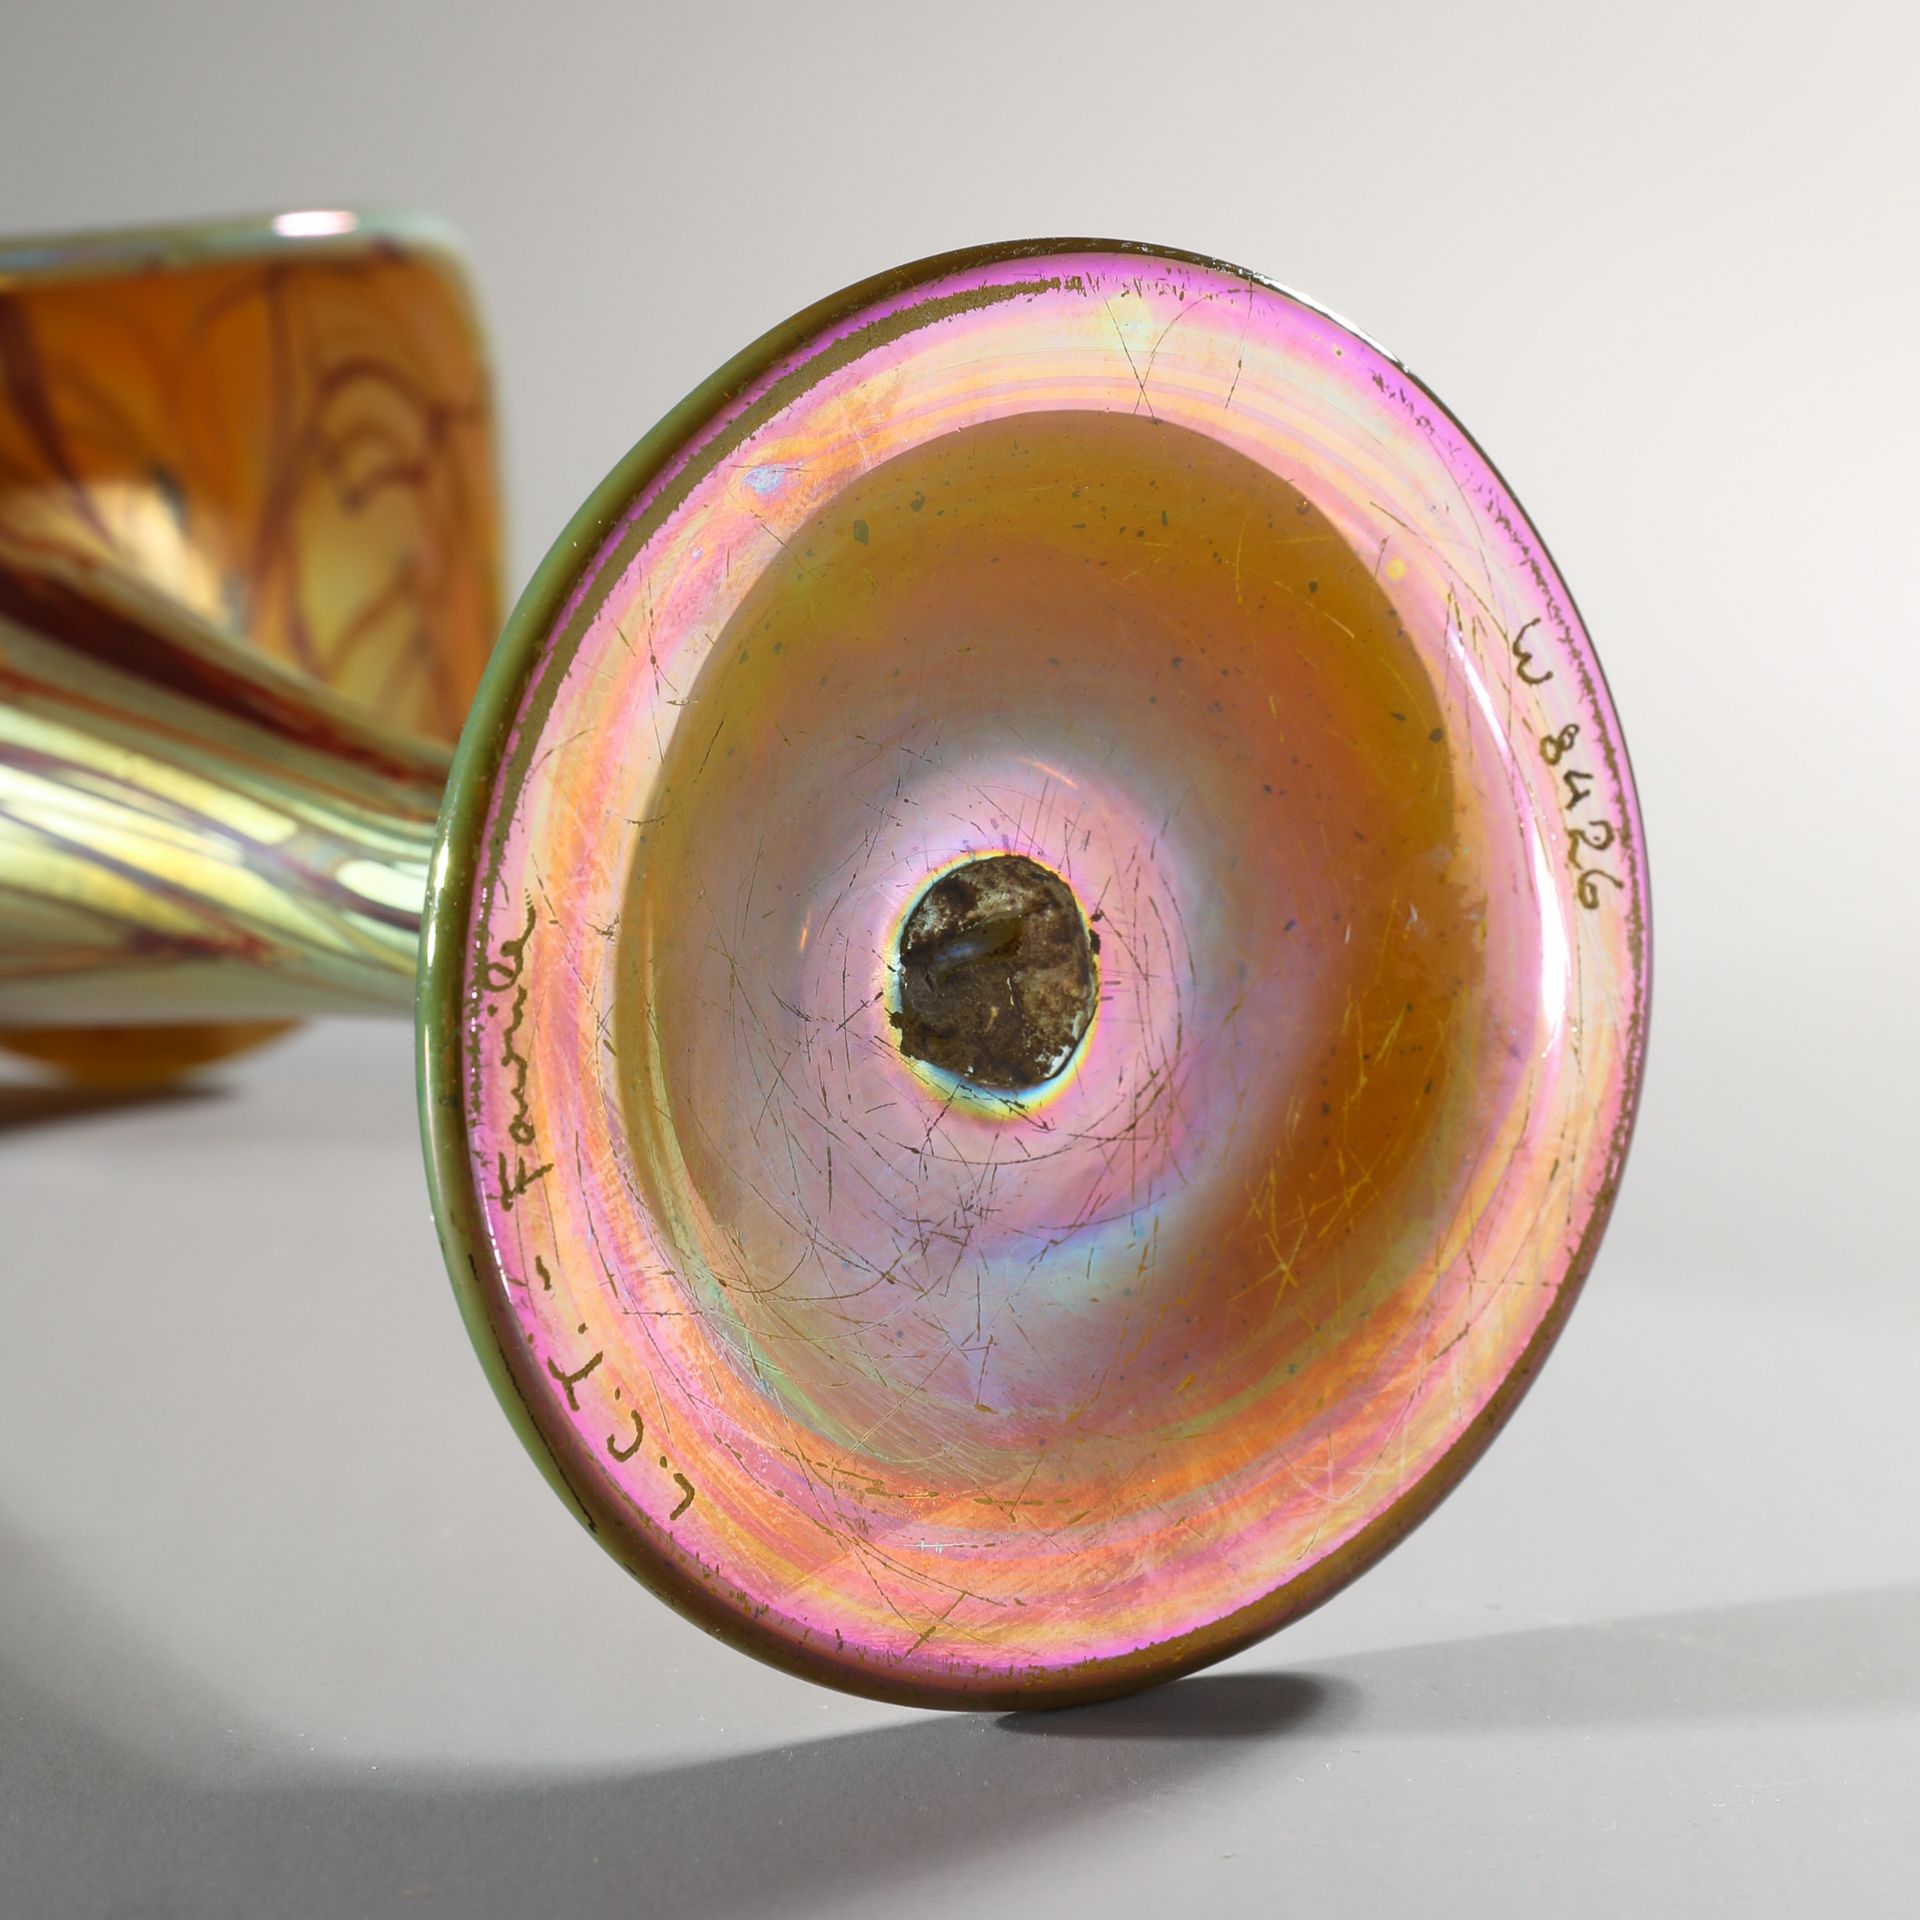 Louis C. Tiffany, Favrile flower cup, around 1904 - Image 7 of 7